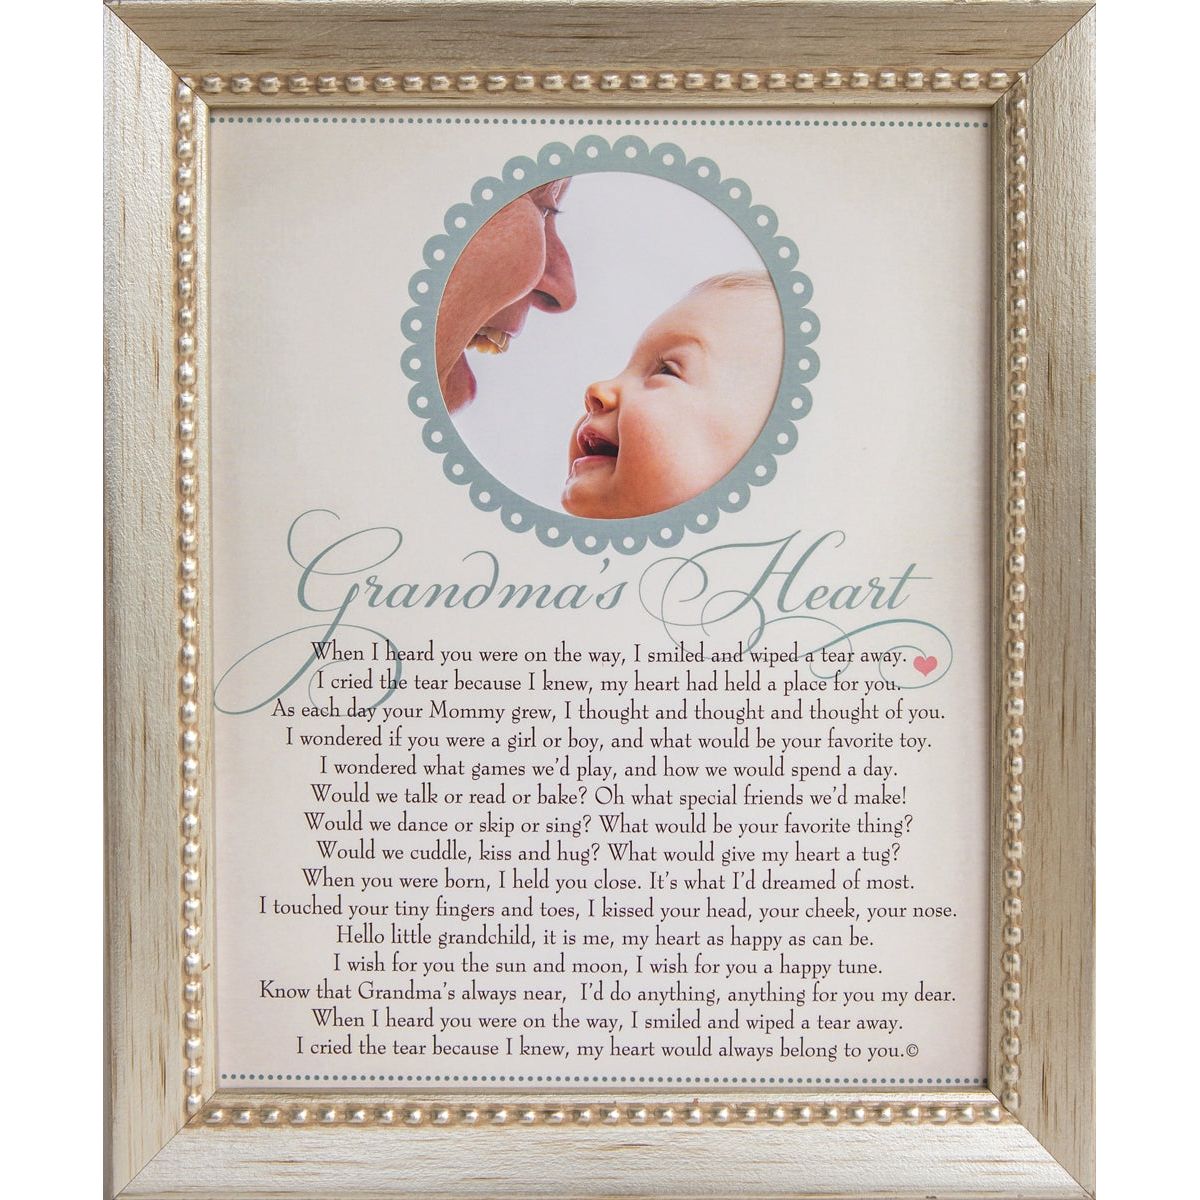 8x10 silver toned beaded wood frame with "Grandma's Heart" poem.